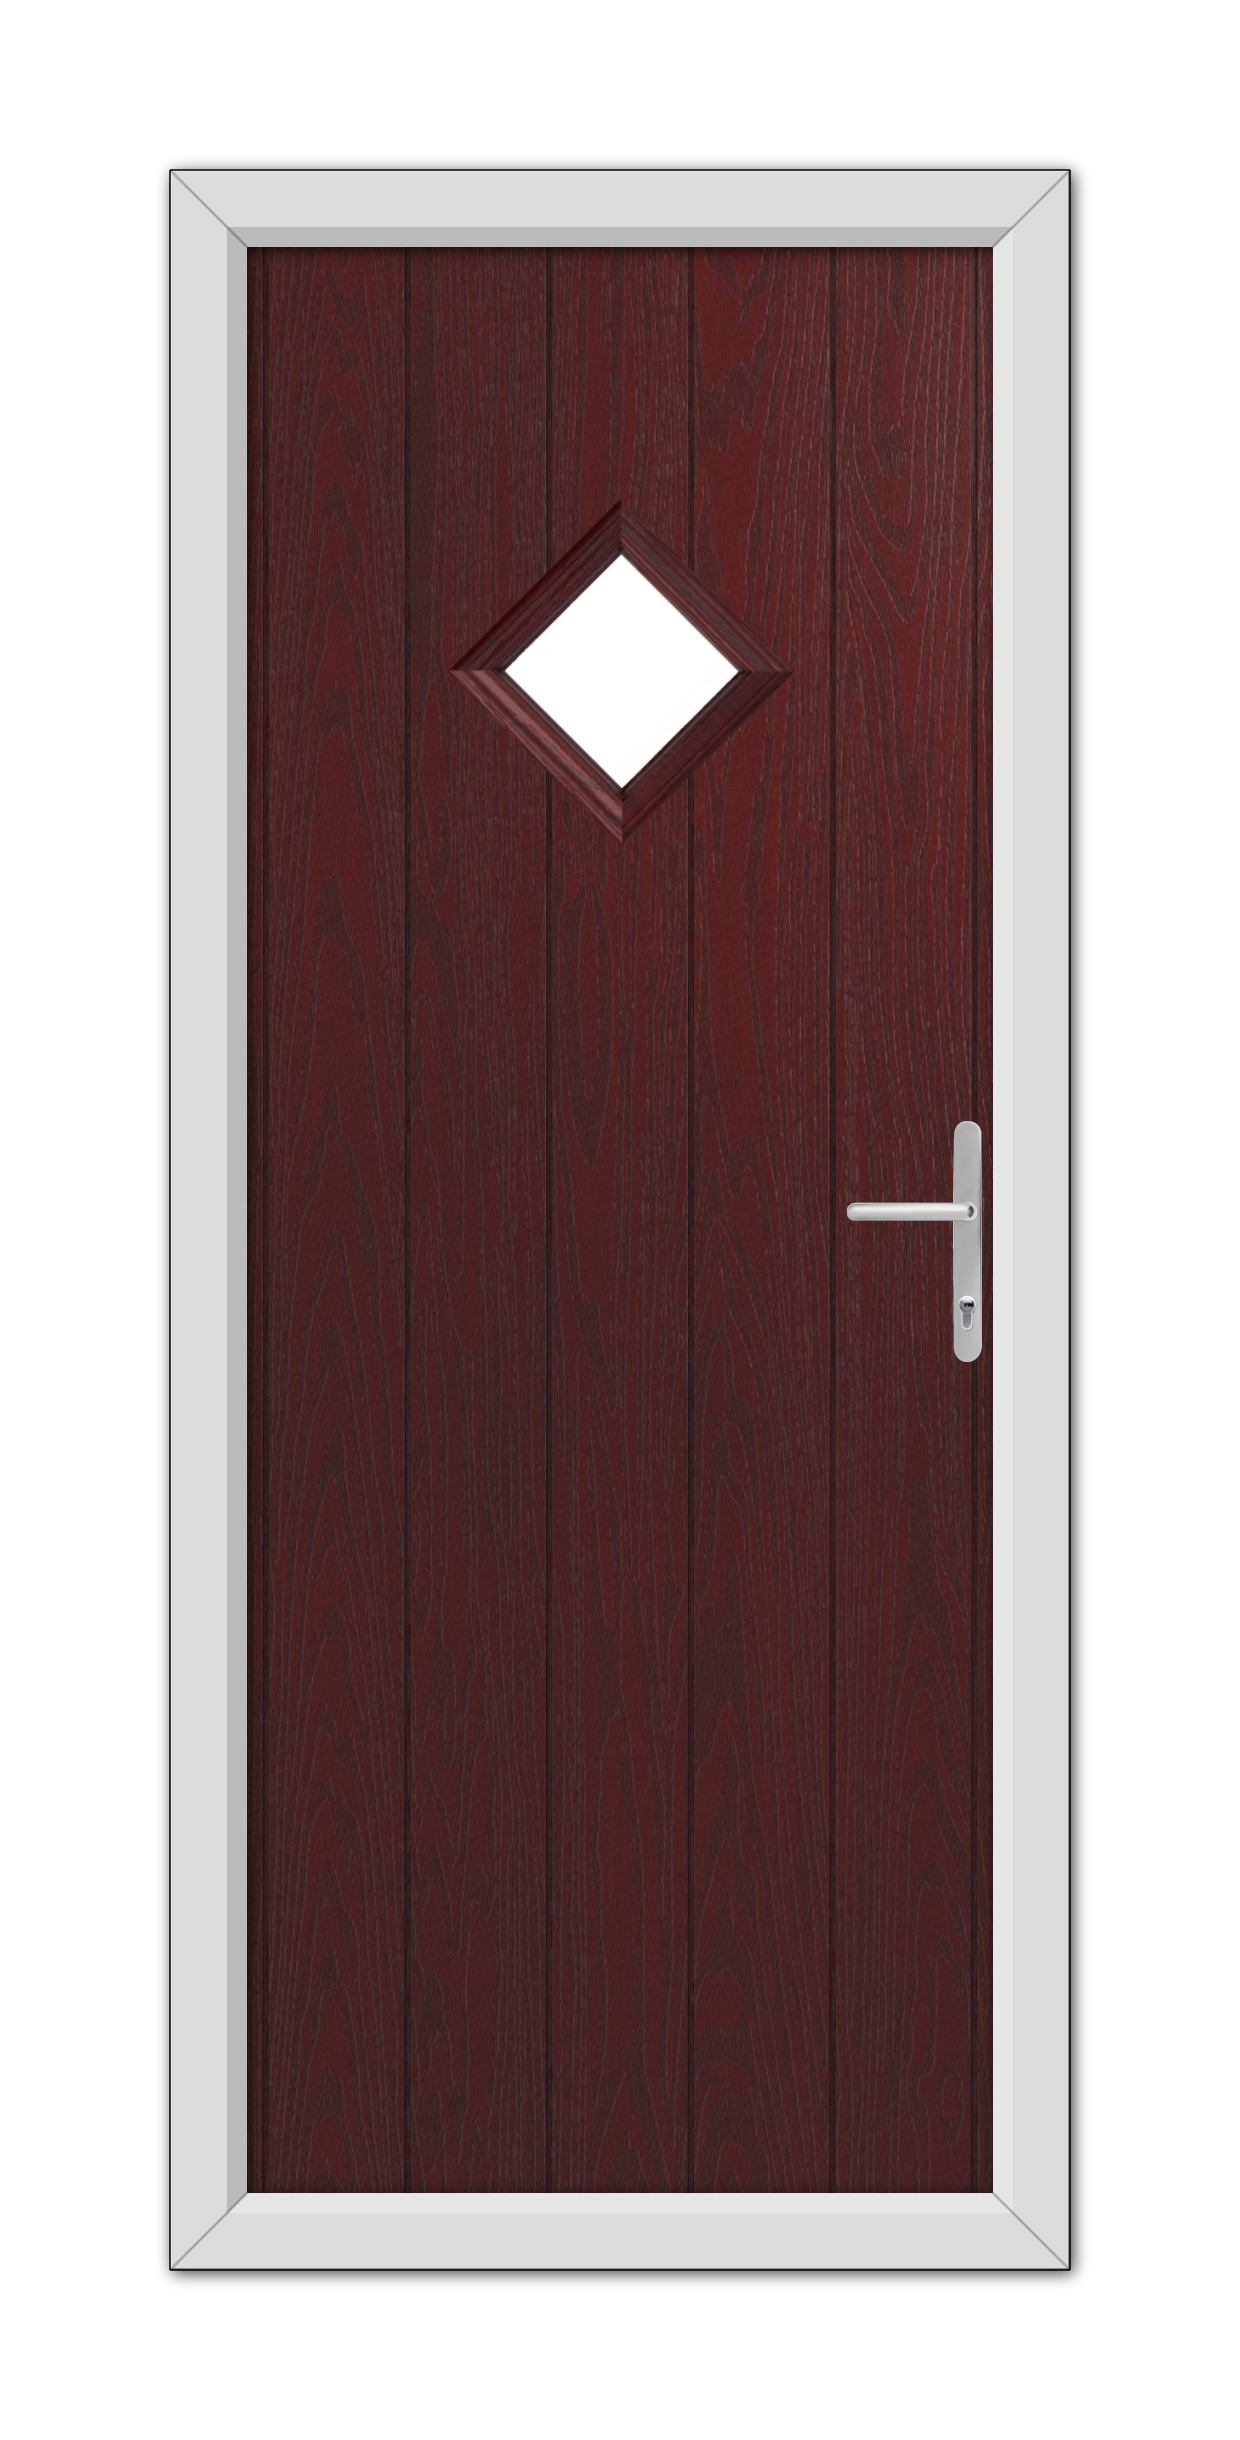 A closed Rosewood Cornwall Composite Door 48mm Timber Core with a dark red finish, featuring a small diamond-shaped window at eye level, framed in white with a modern handle.